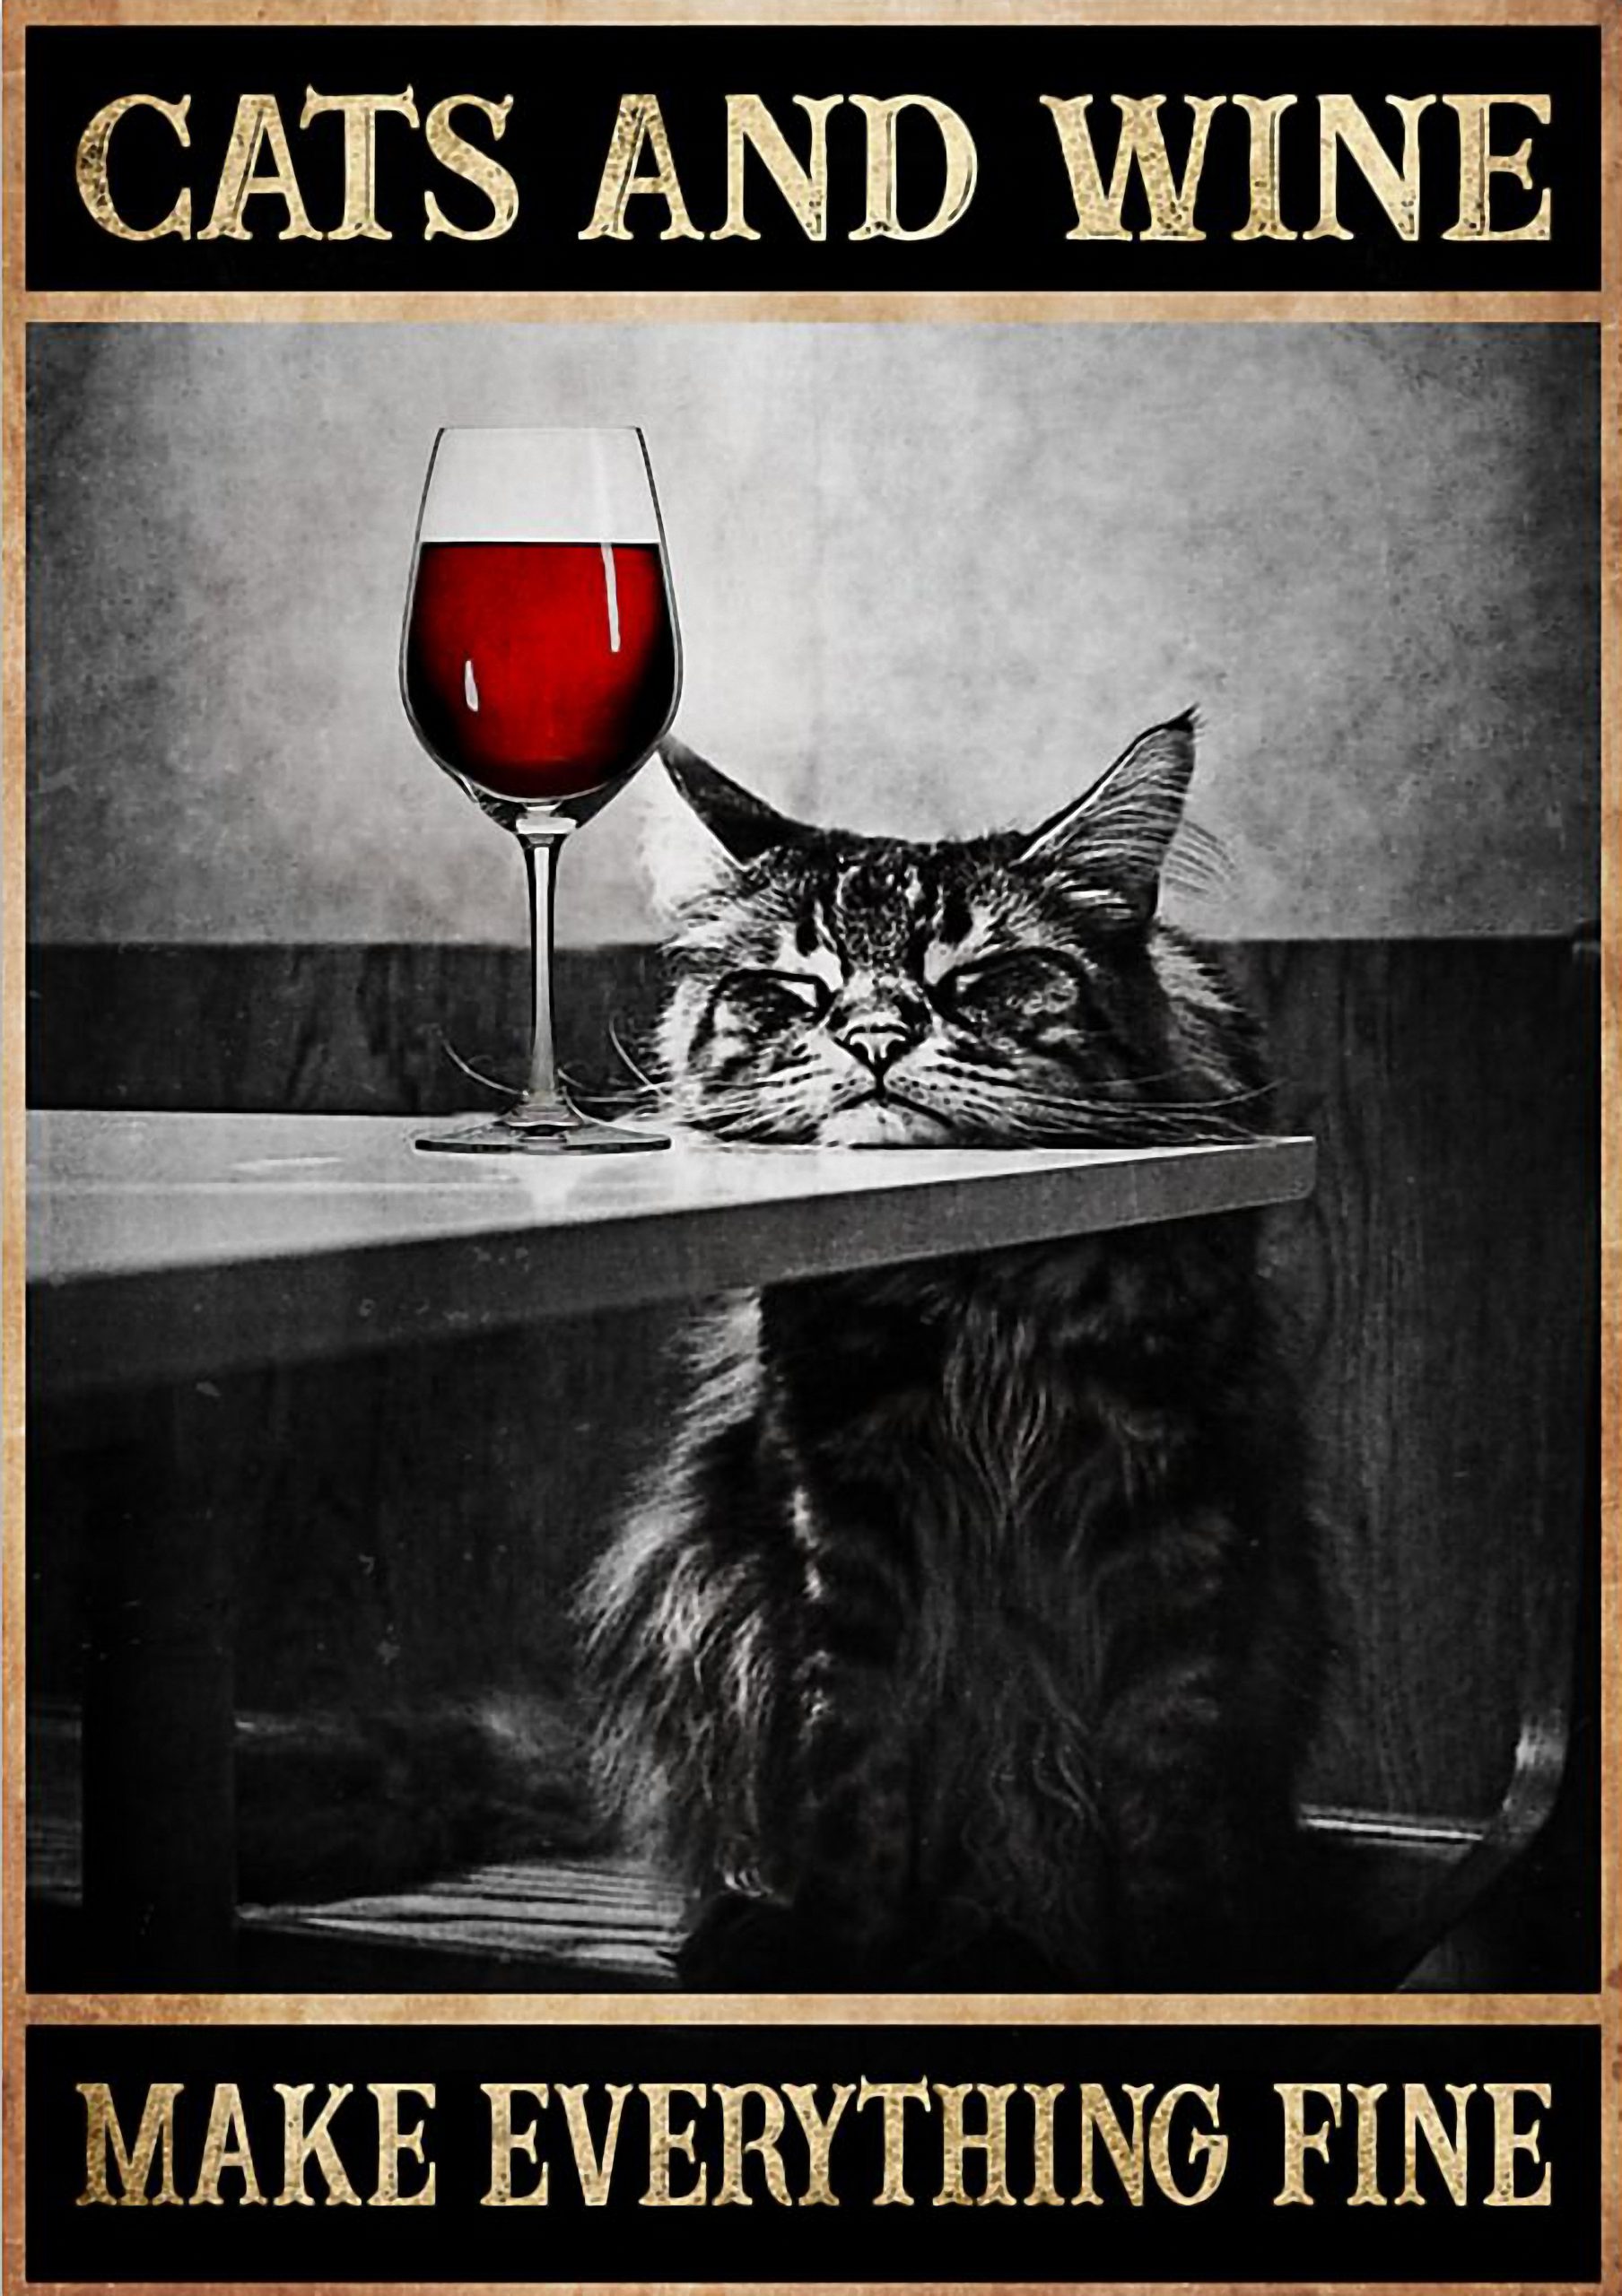 Cats and wine make everything fine posterz